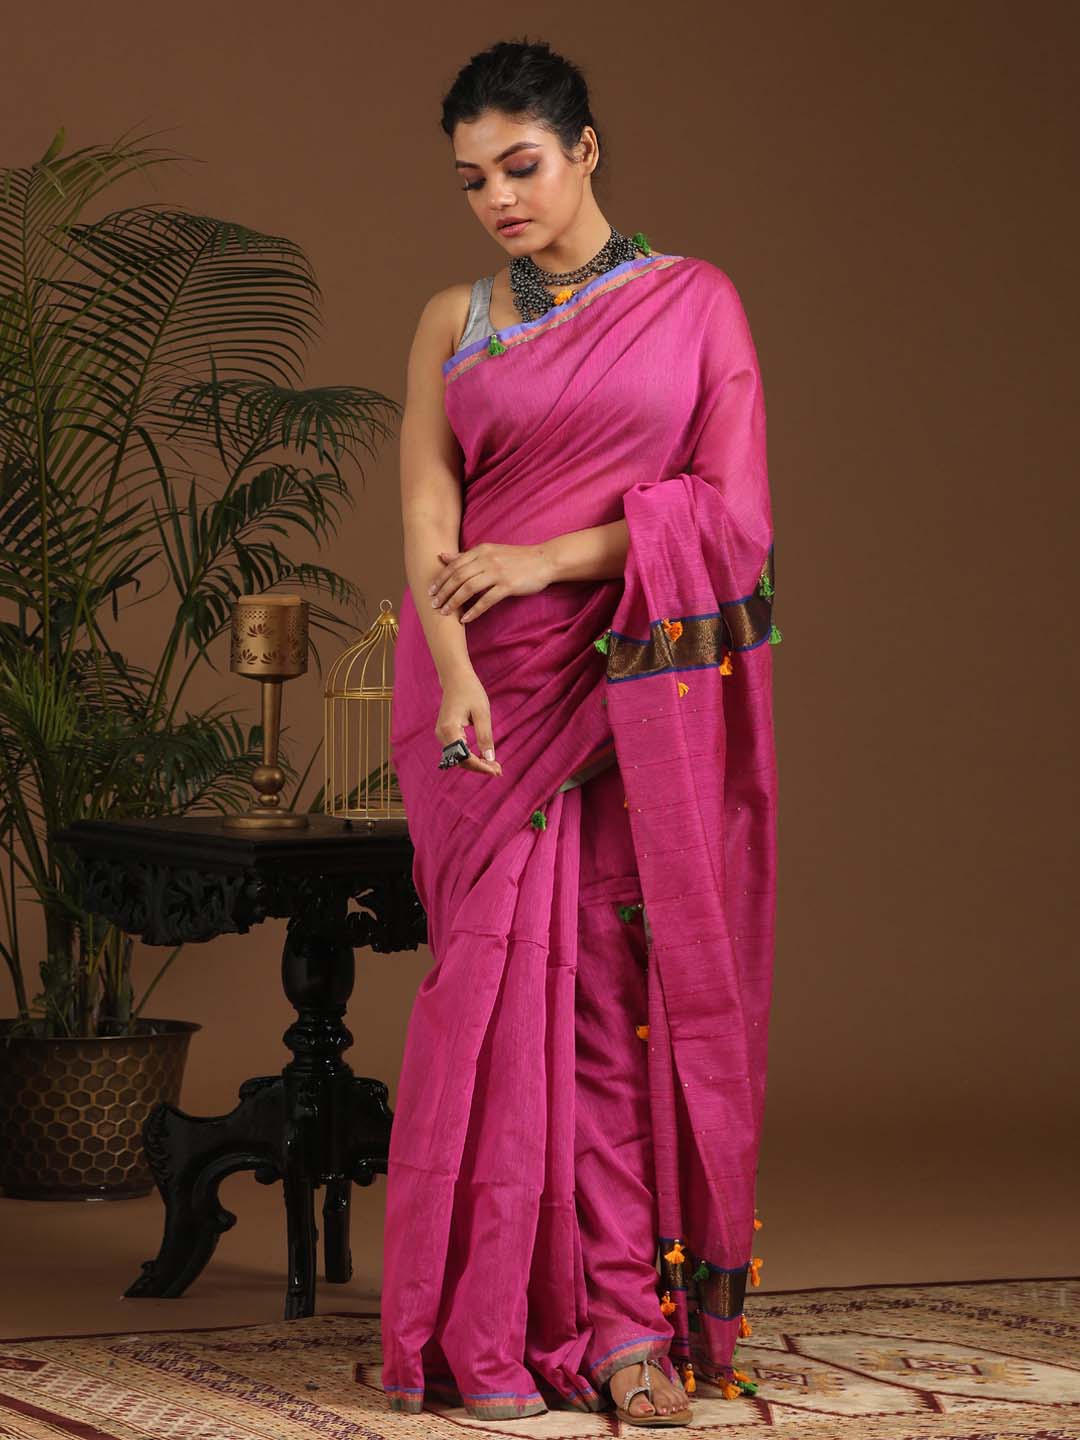 Indethnic Red and Black Solid Colour Blocked Saree with Tassles - View 1